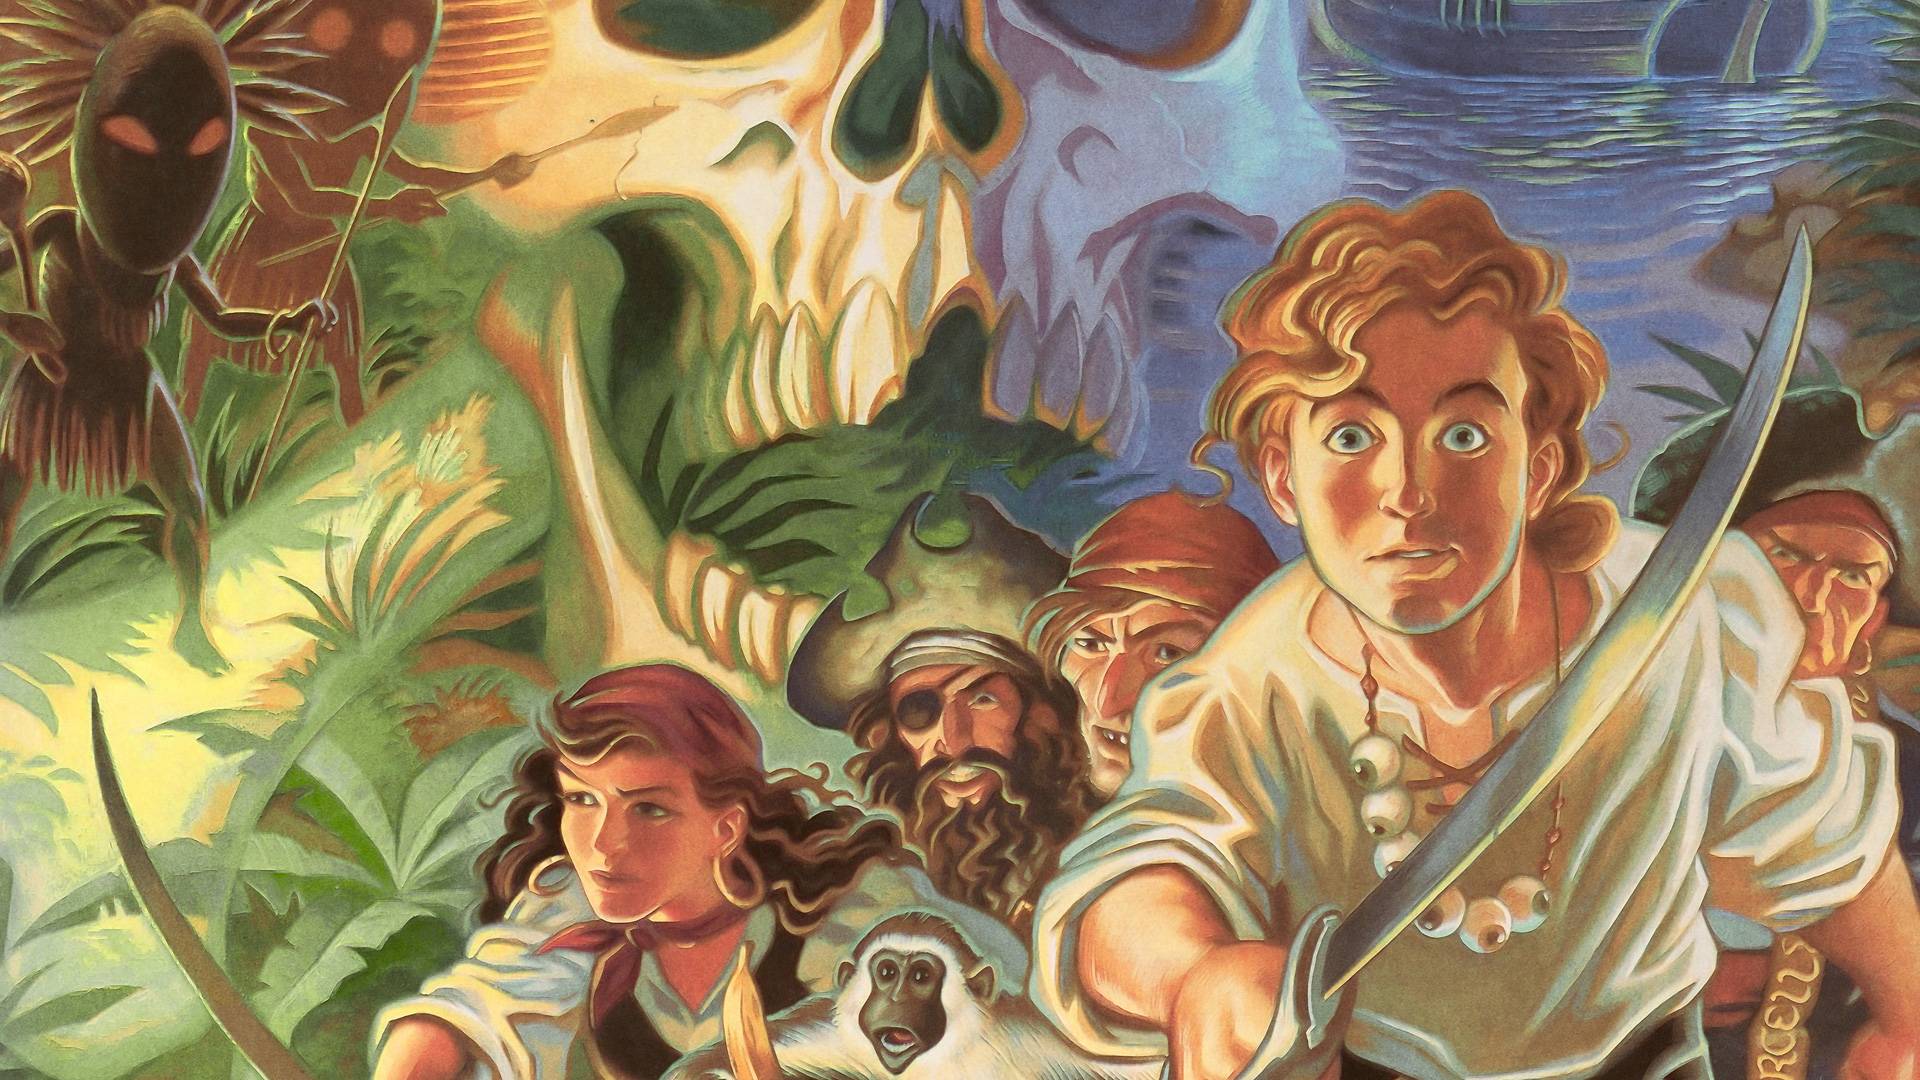 Don't Mind Me, Just Posting Some Hd Monkey Island Wallpapers - Guybrush Threepwood And Elaine Marley , HD Wallpaper & Backgrounds